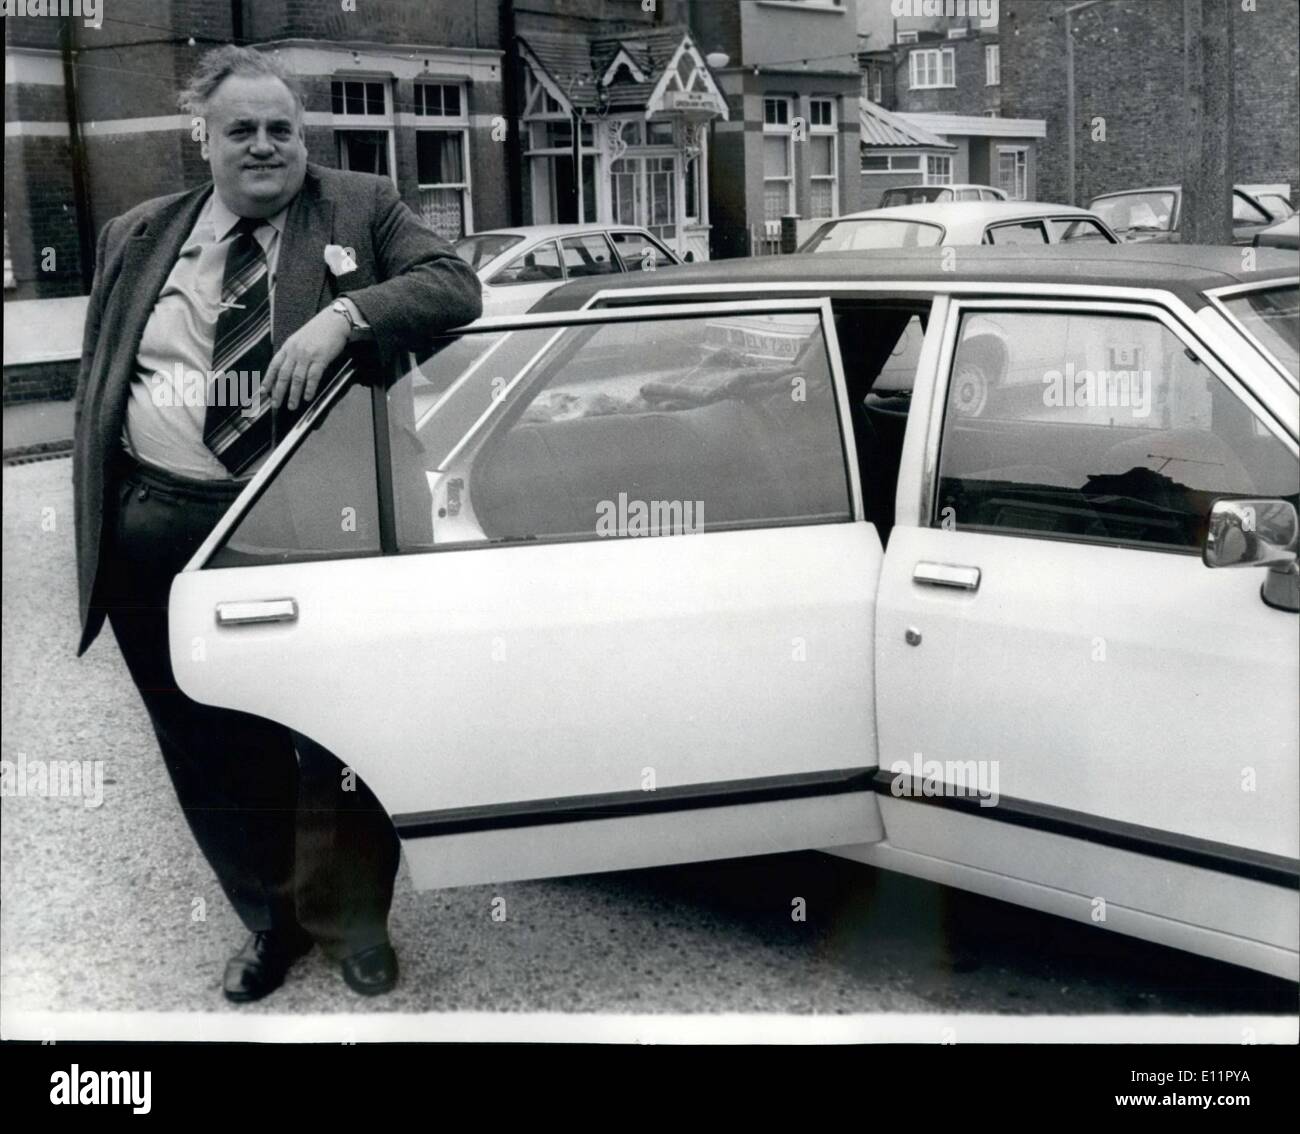 Sep. 09, 1979 - Cyril Smith's Made-To-Measure Car: Cyril Smith, at stone, Britain's heavyweight M.P. shows off his latest gimmick, a limousine to suit his ample proportions, at the Liberal Party Conference, now taking place at Marget, Xent. It is a Ford Minster, which is basically a ''Stretched'' version of the Ford Graada. Two fact has been added to the Chassis and the rear door widened. Photo shows Cyril Smith seen on his arrival at Margate for the Liberal Party Conference in his specially ''stretched'' car. Stock Photo